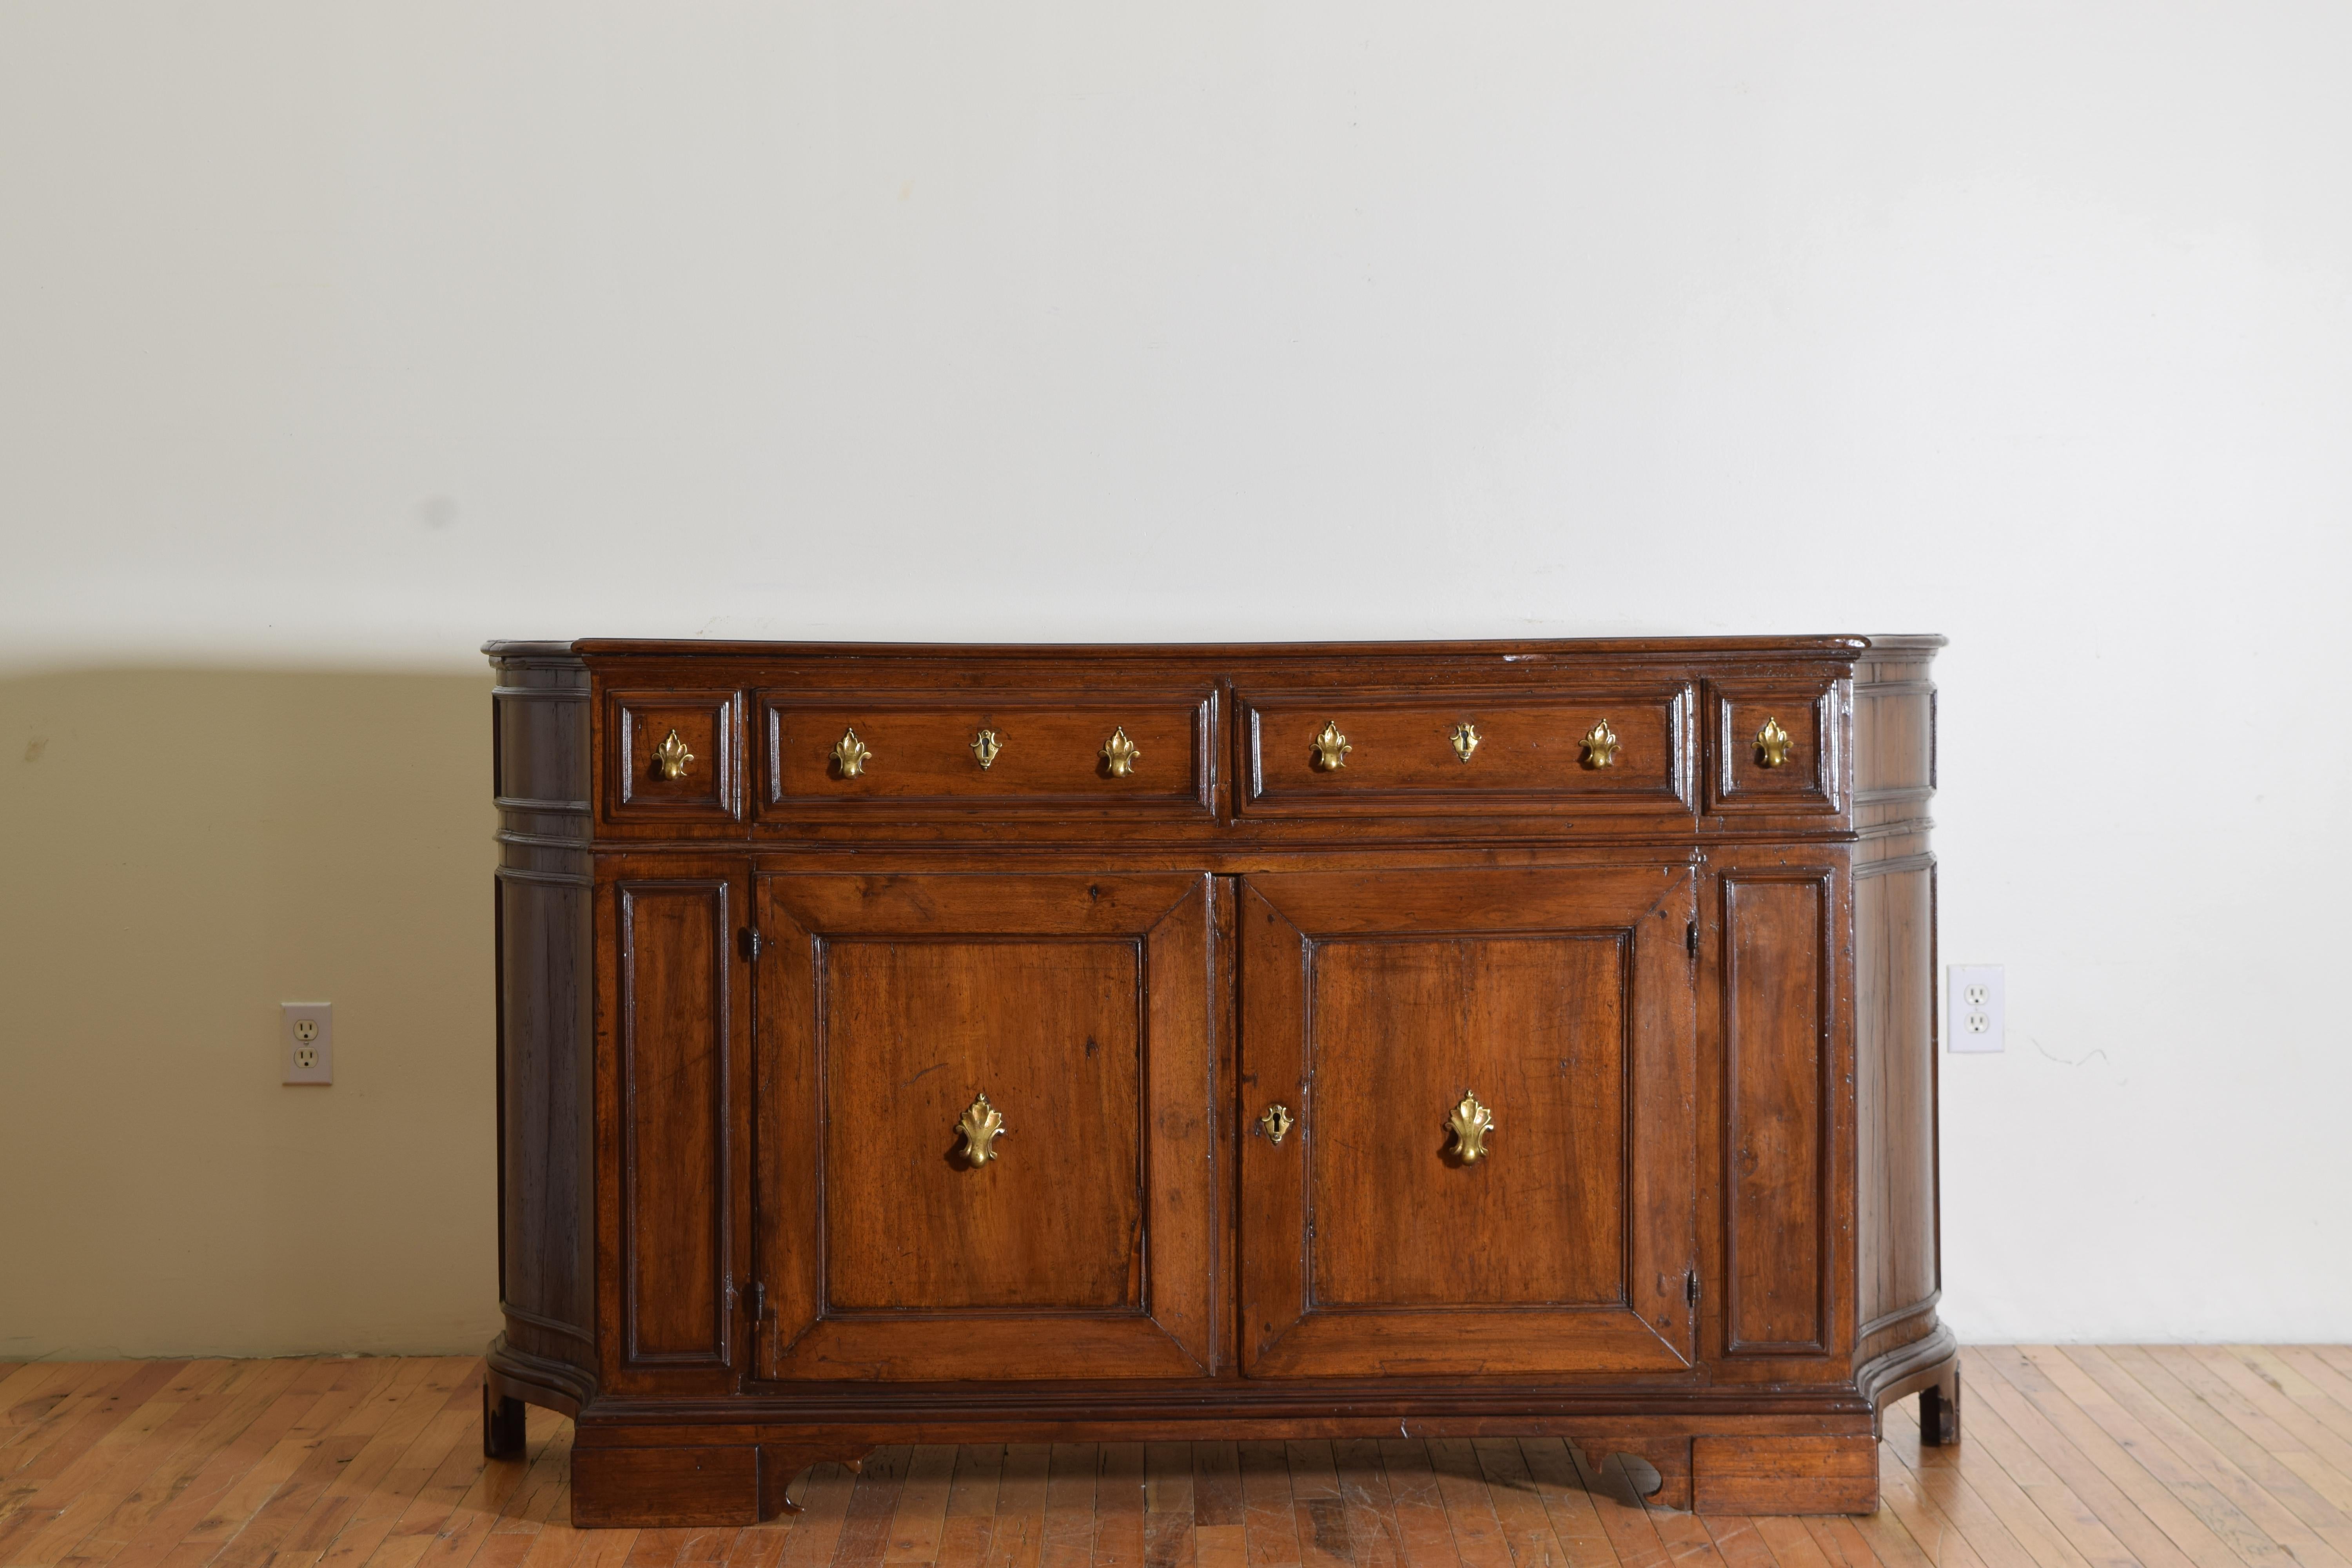 This walnut credenza has three drawers over two doors with elaborate brass decoration for the handles and pulls. The top shaped with a molded edge while the case is also shaped and having molded panels on the doors and sides.